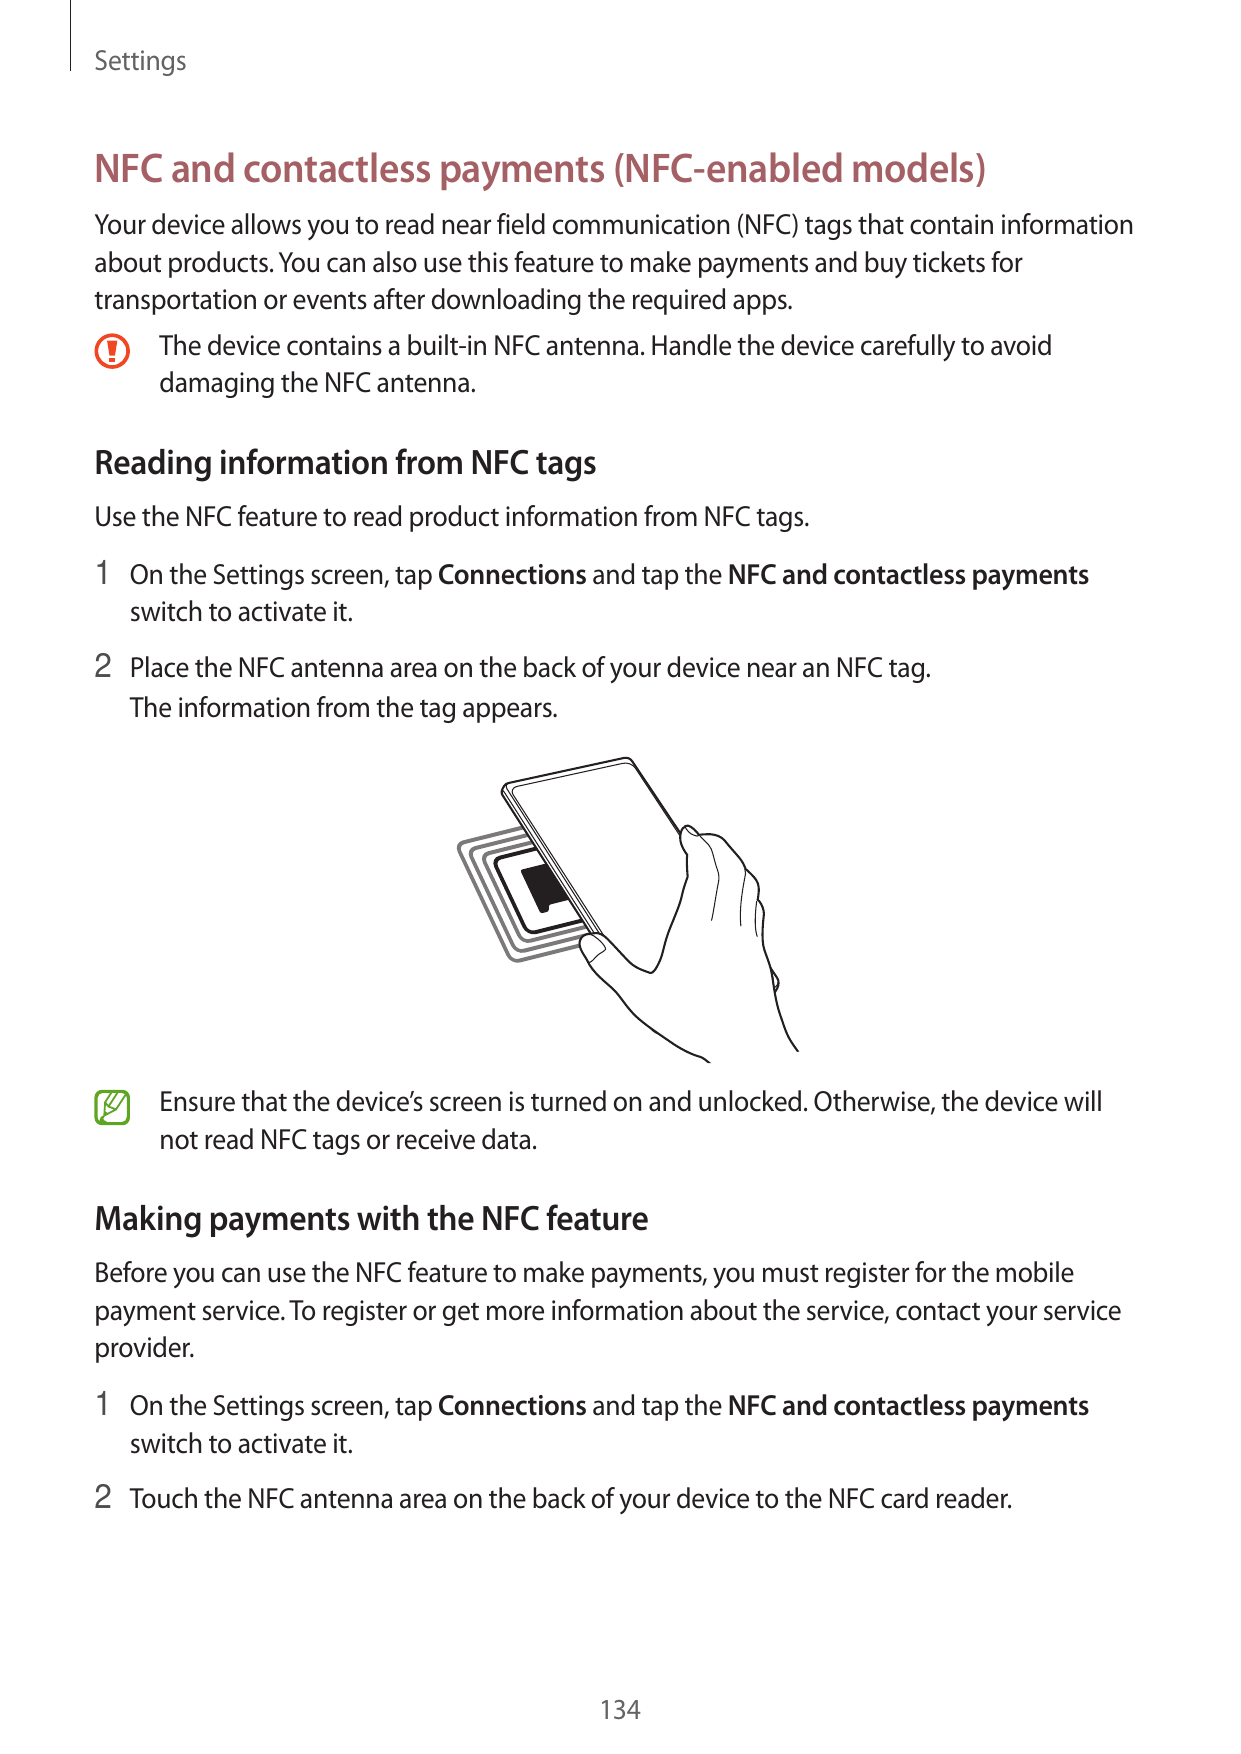 SettingsNFC and contactless payments (NFC-enabled models)Your device allows you to read near field communication (NFC) tags that